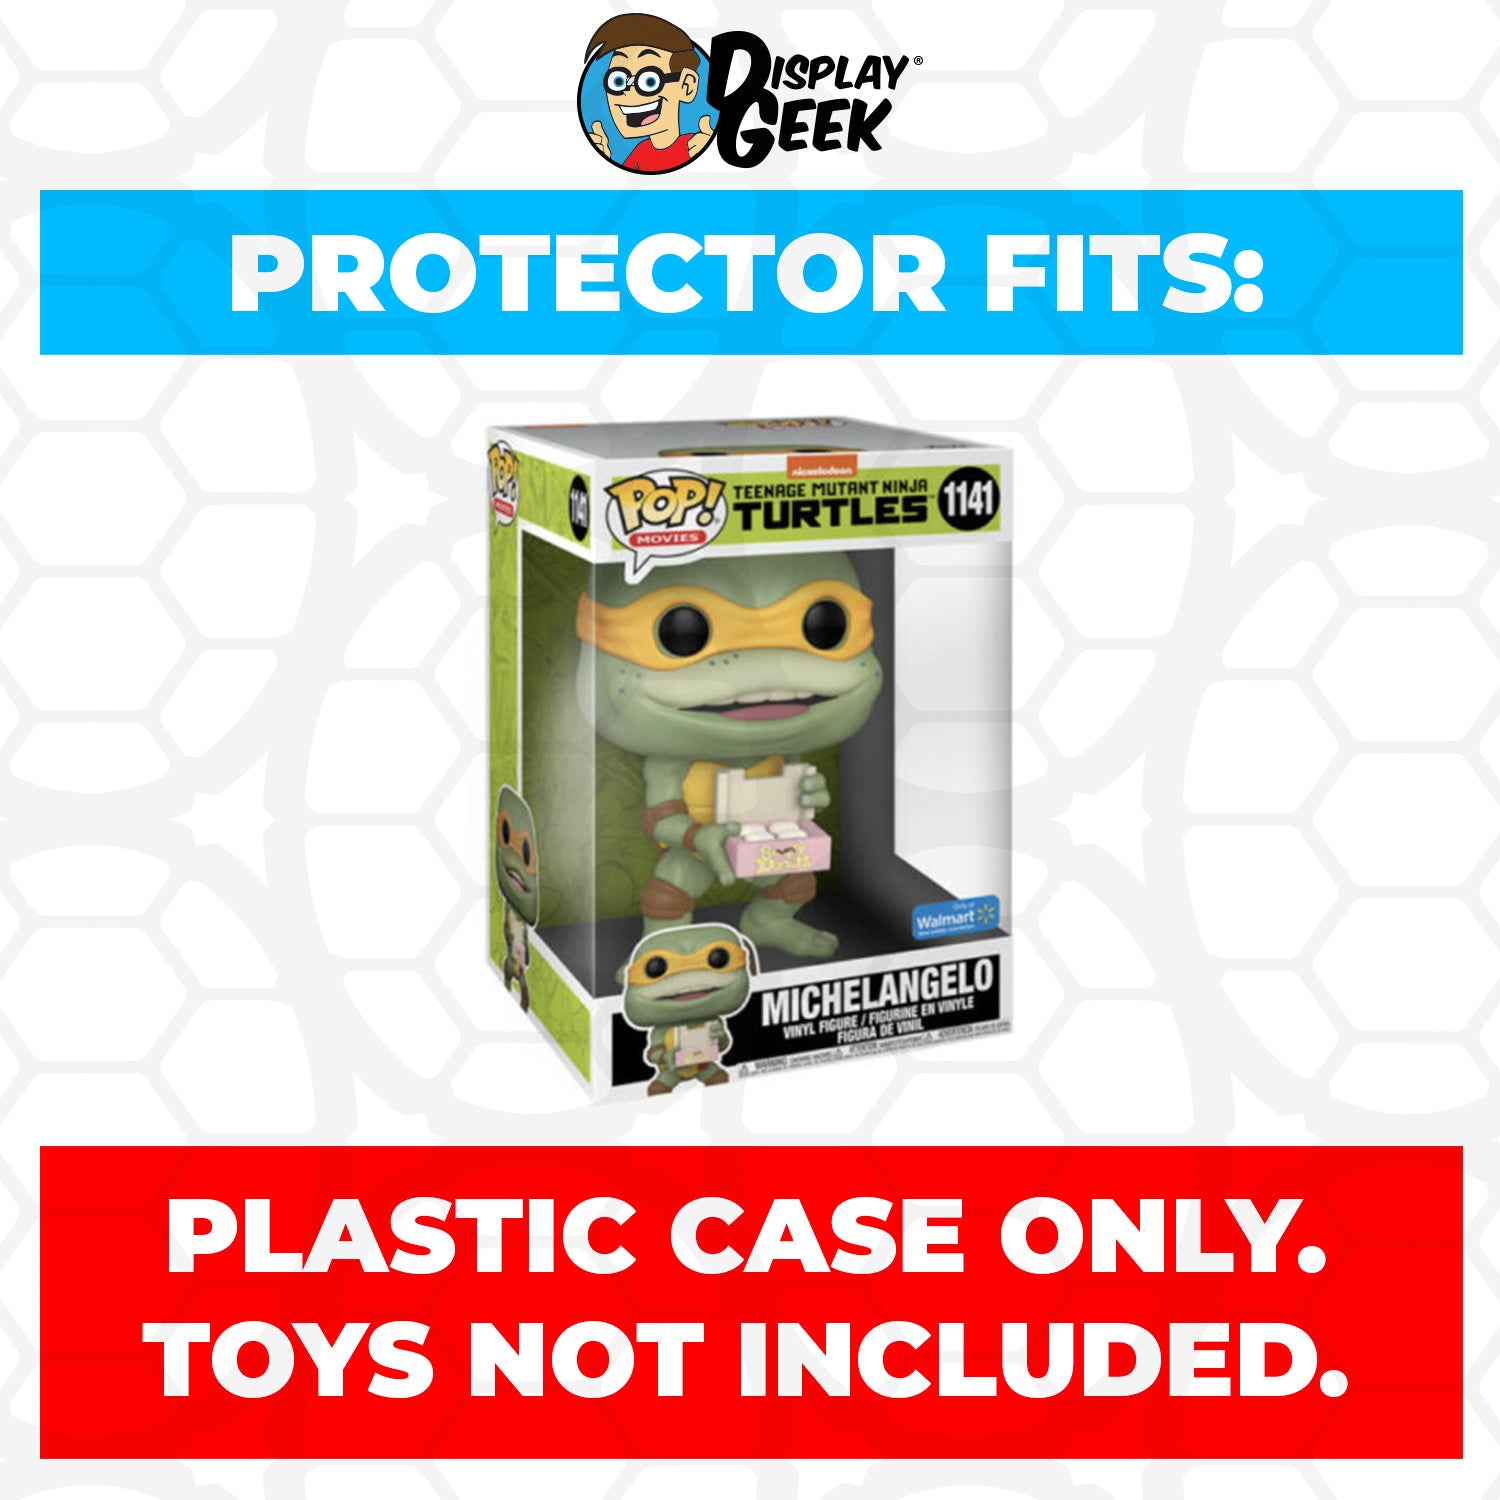 Pop Protector for 10 inch Michelangelo with Donuts #1141 TMNT Jumbo Funko Pop - PPG Pop Protector Guide Search Created by Display Geek